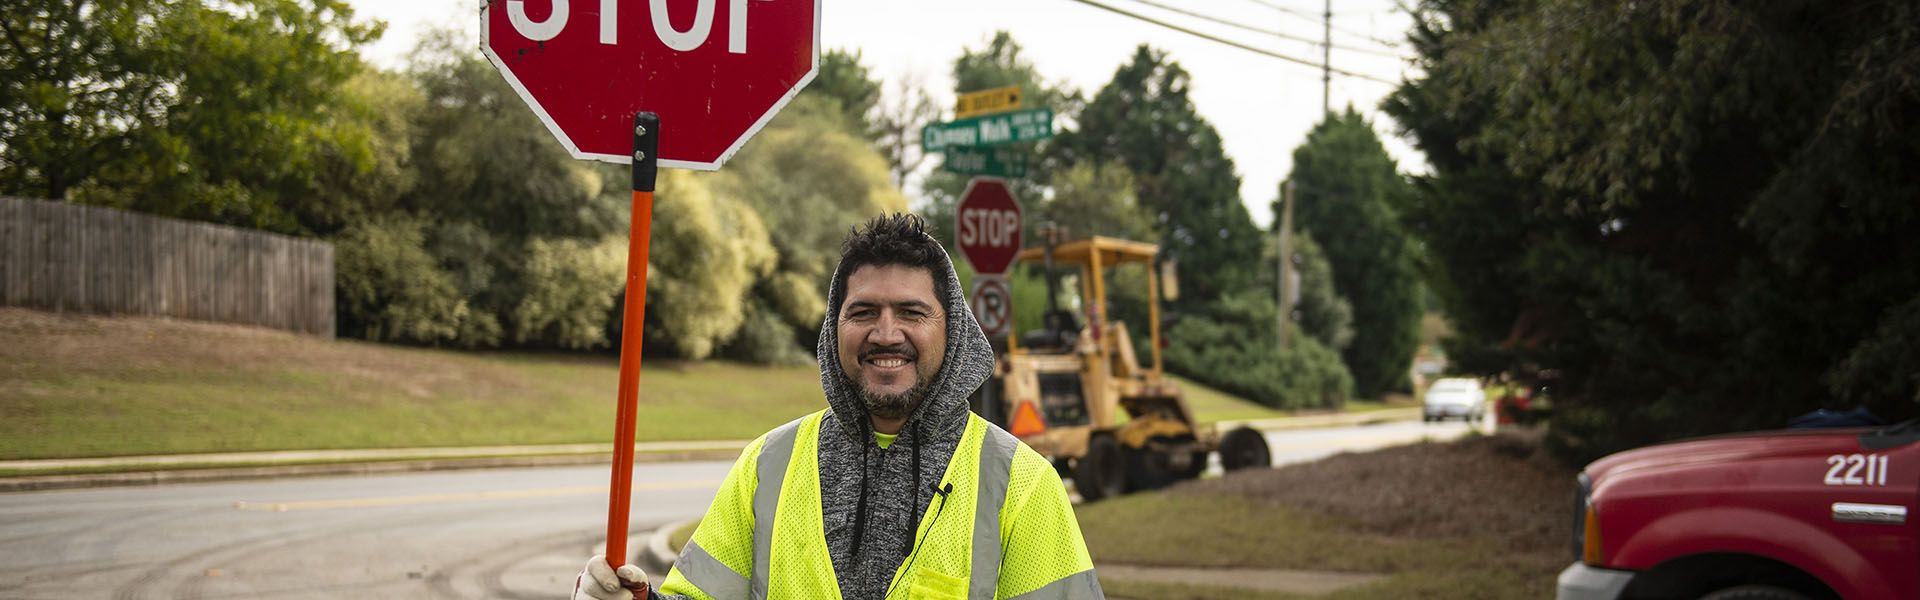 A young road construction worker smiles while holding a stop sign on site of his highway construction career in Georgia